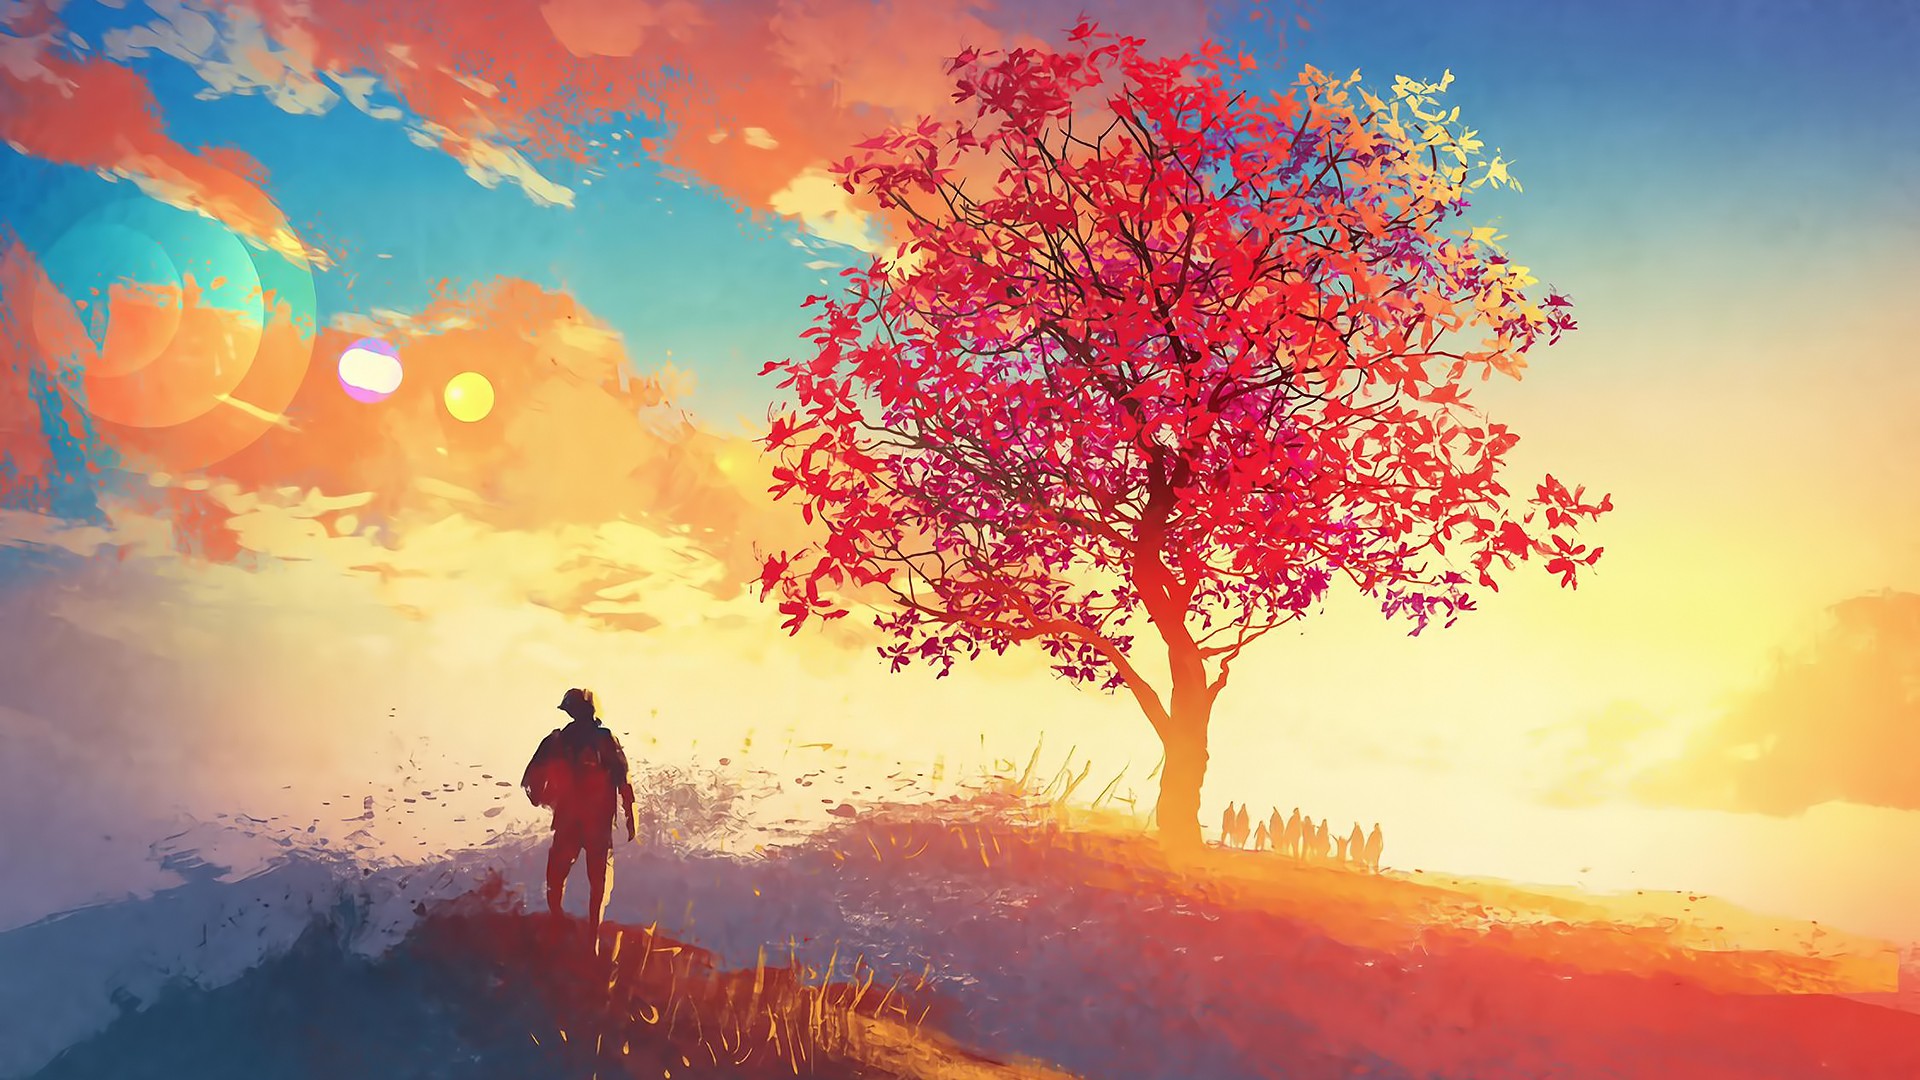 General 1920x1080 trees people painting artwork sky nature clouds sunlight men outdoors